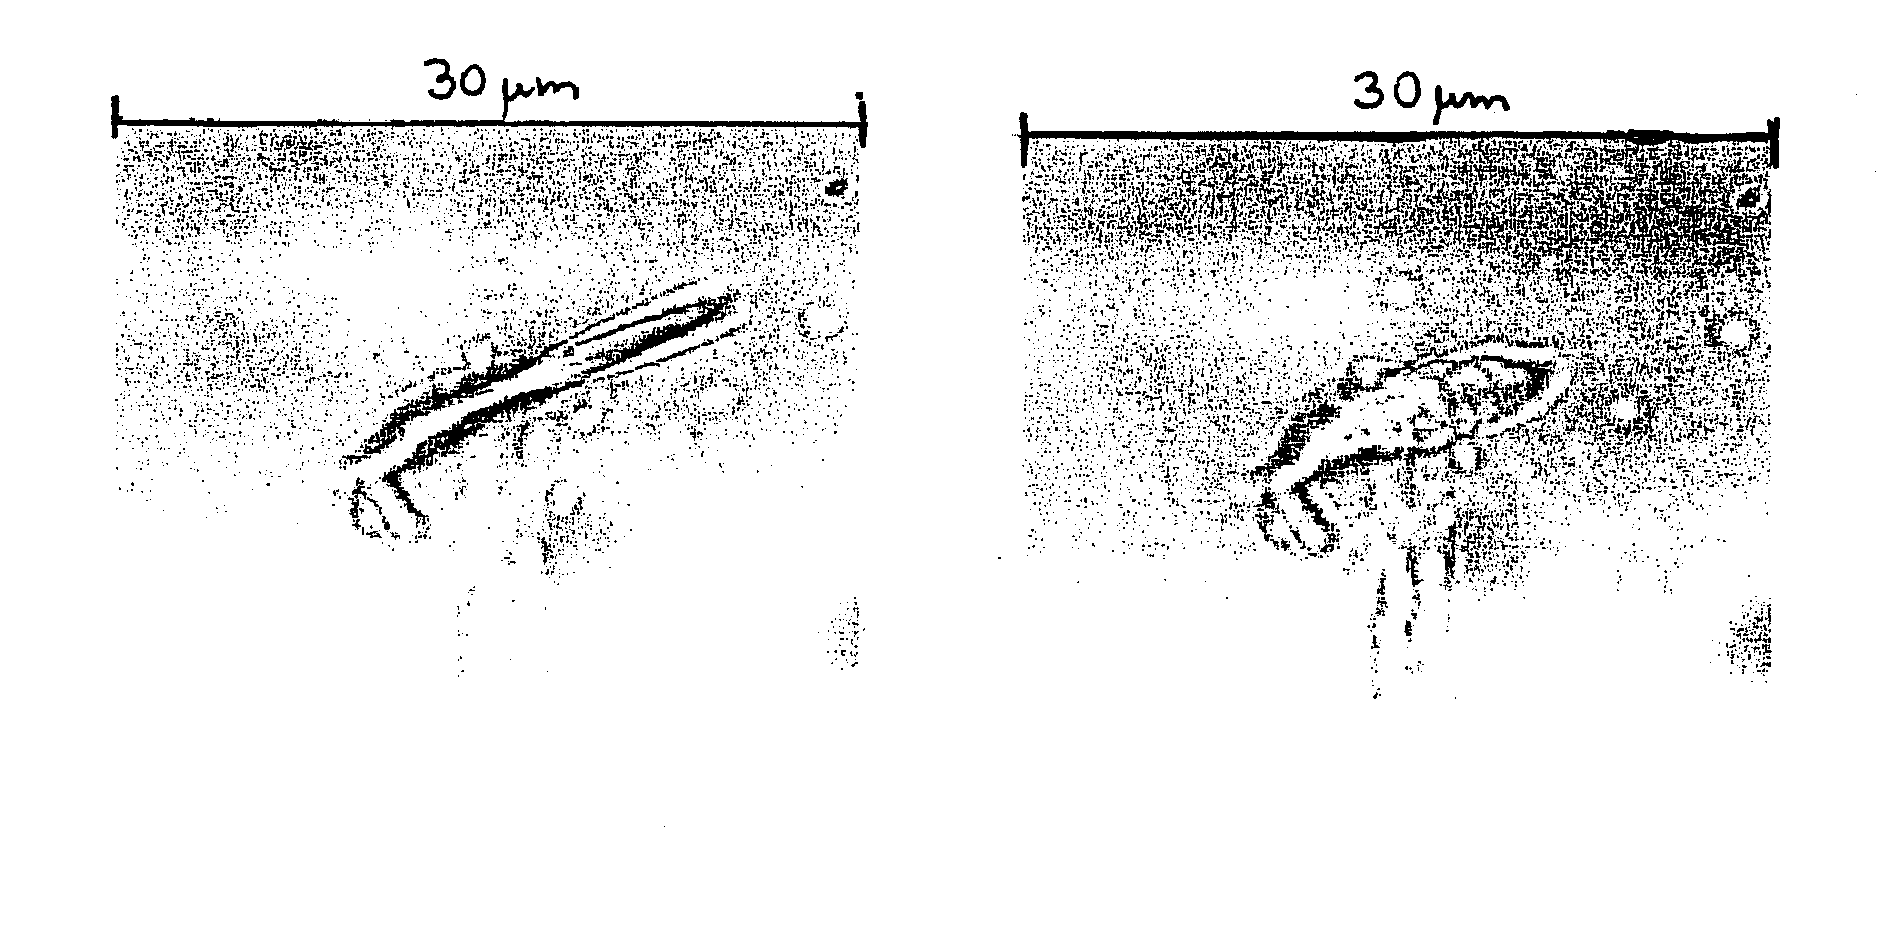 Forisomes, Method for Their Isolation, and Their Use as a Molecular Working Machine